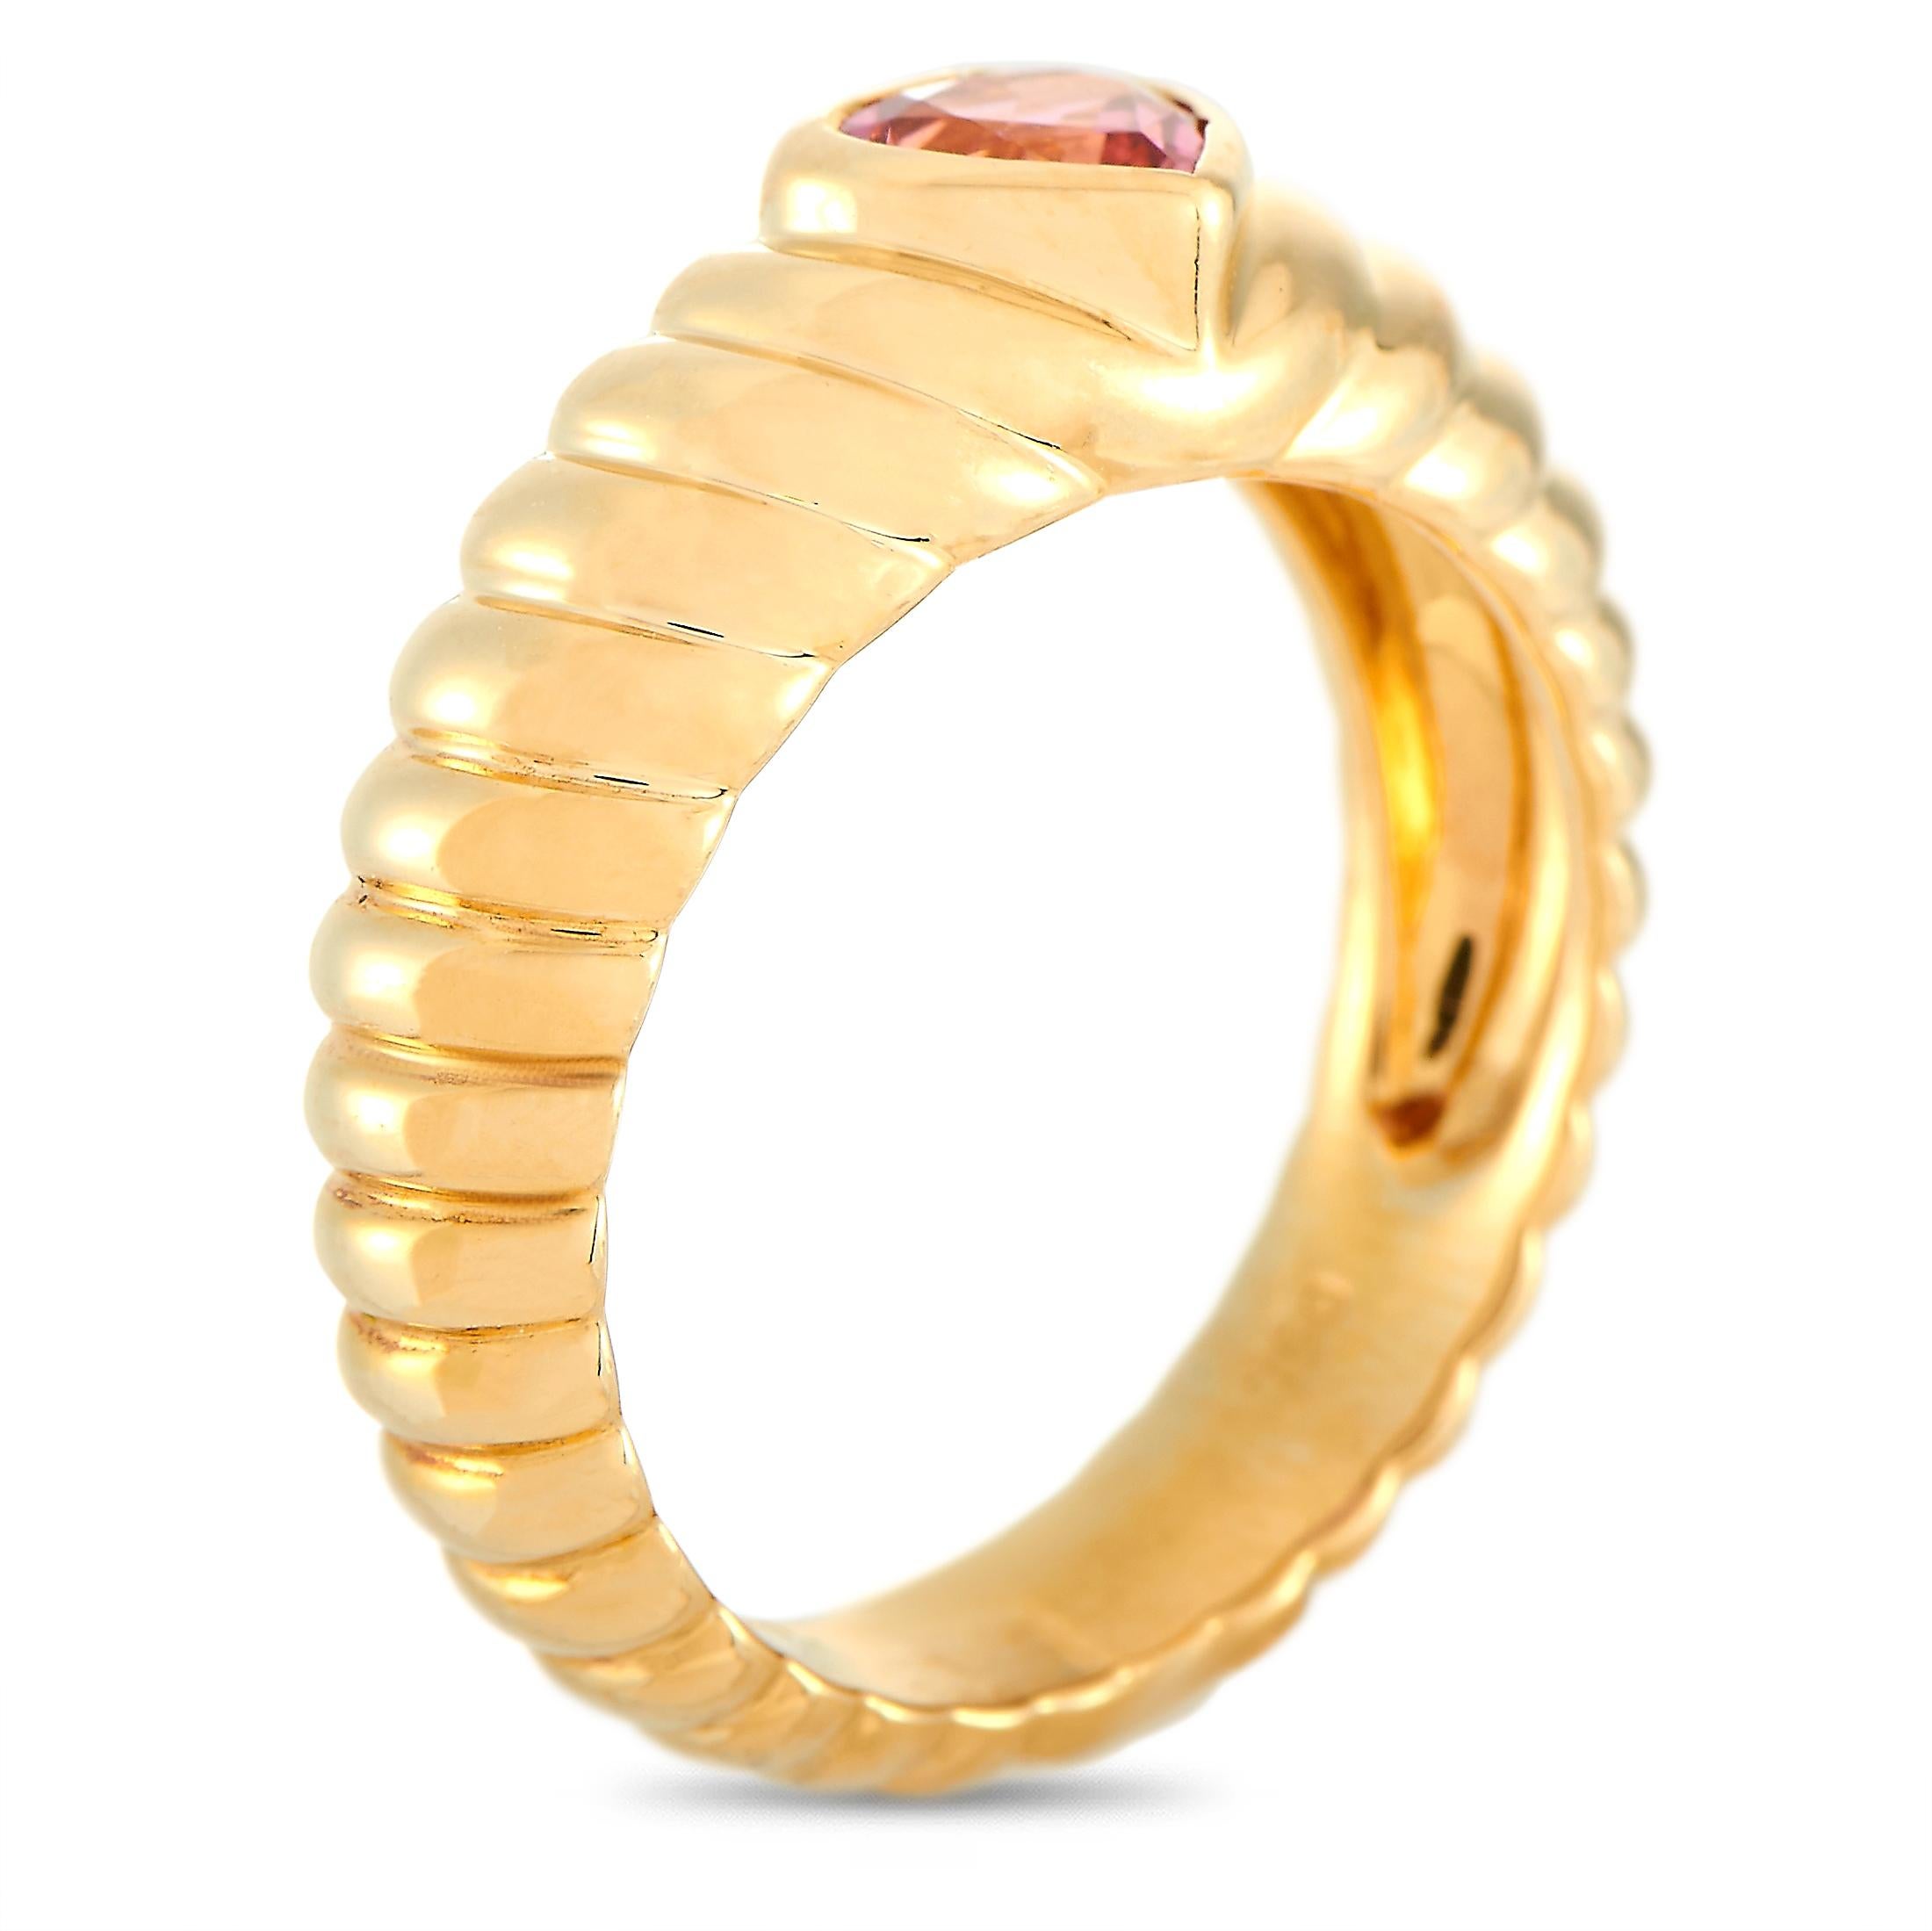 This Tiffany & Co. ring is crafted from 18K yellow gold and set with a heart-shaped tourmaline. The ring weighs 5.3 grams and boasts band thickness of 5 mm and top height of 5 mm, while top dimensions measure 6 by 6 mm.
 
 Offered in estate